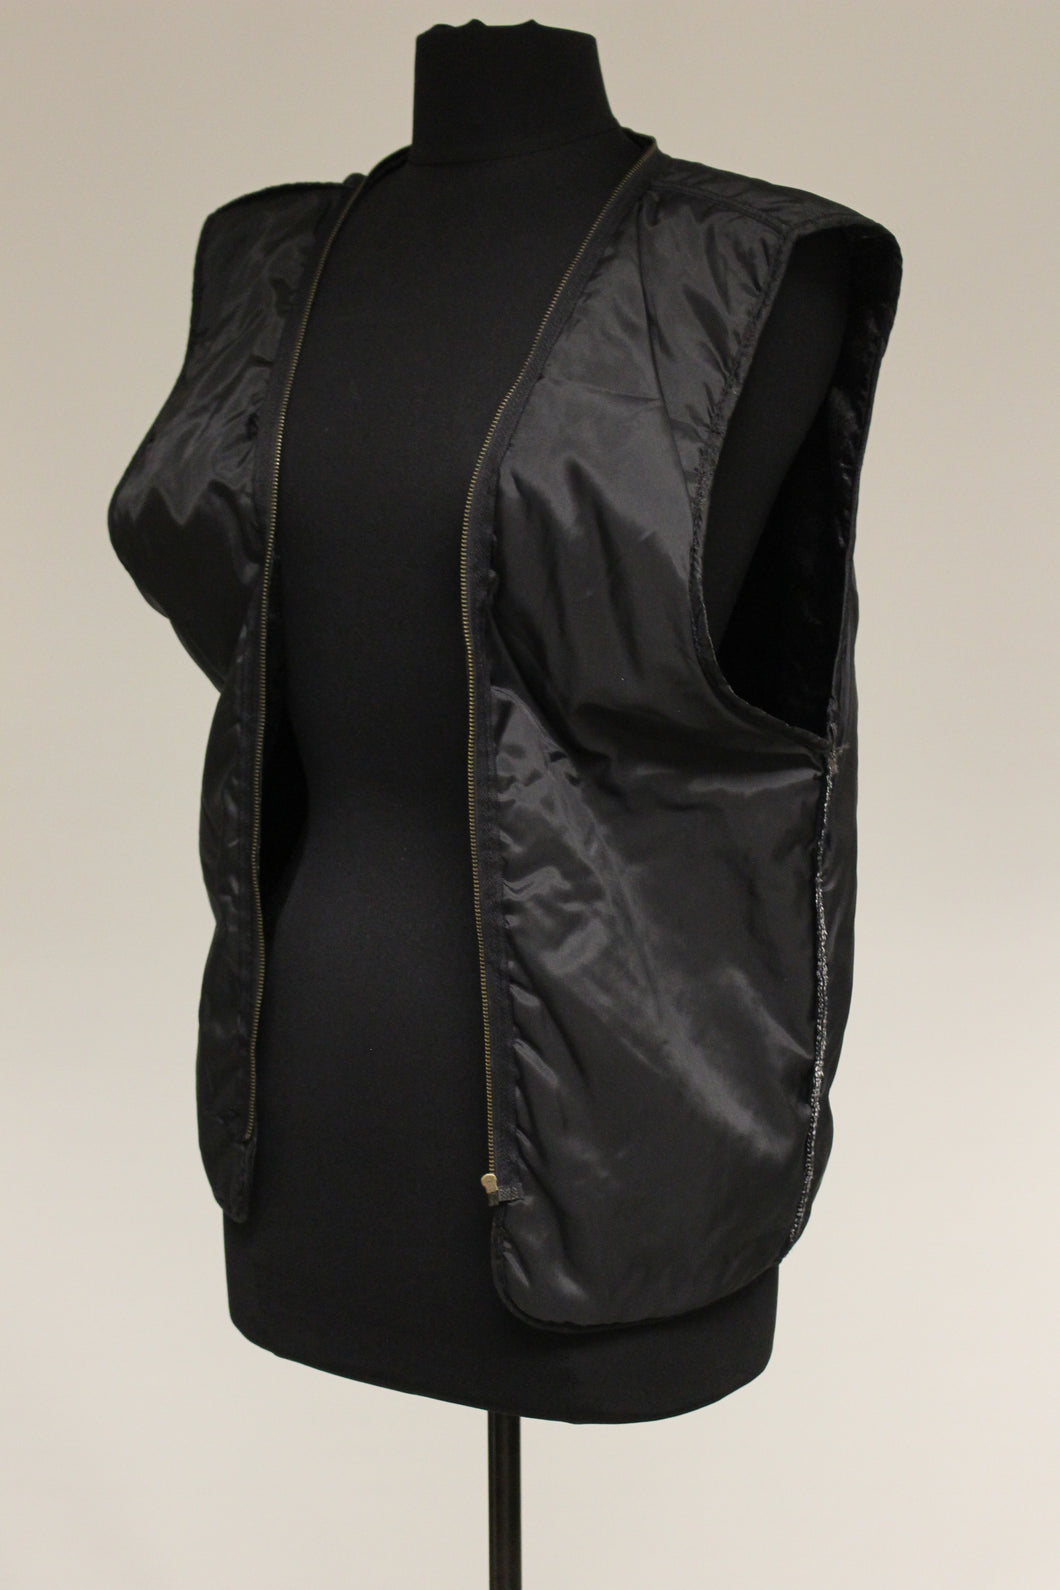 Thinsulate PELLE Studio Woman's Coat Liner, Size: x-Small, Black